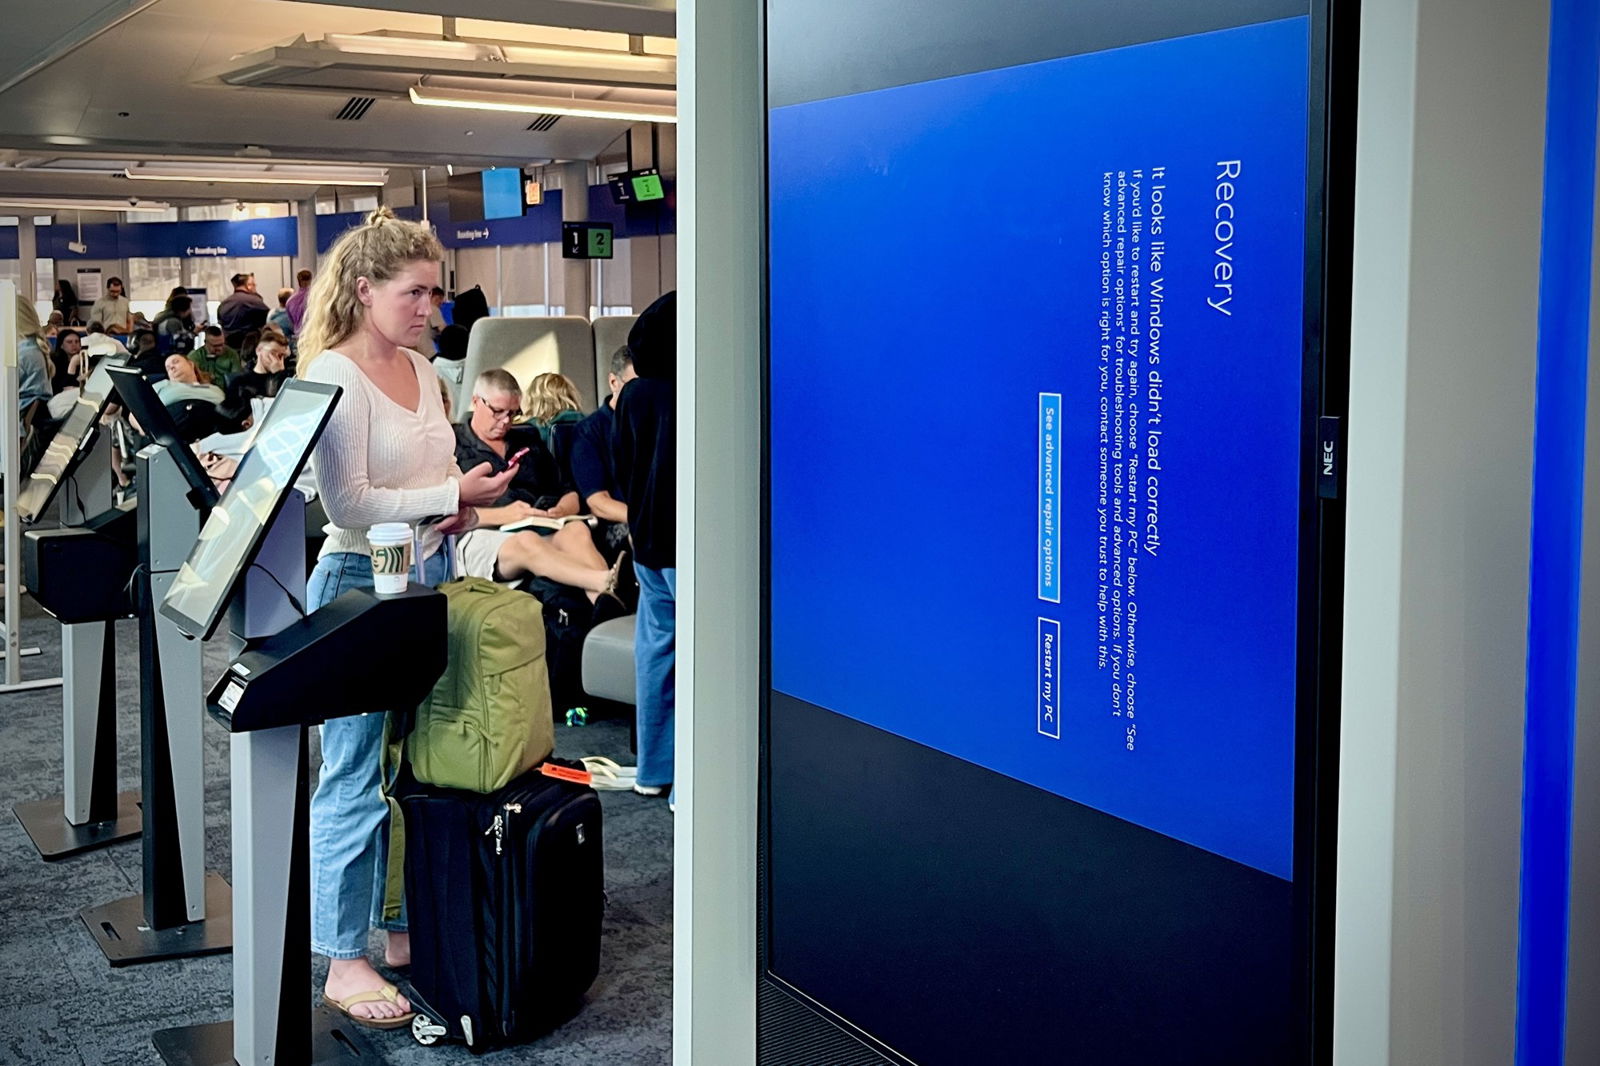 A blue recovery screen can be seen inside an airport terminal in Chicago